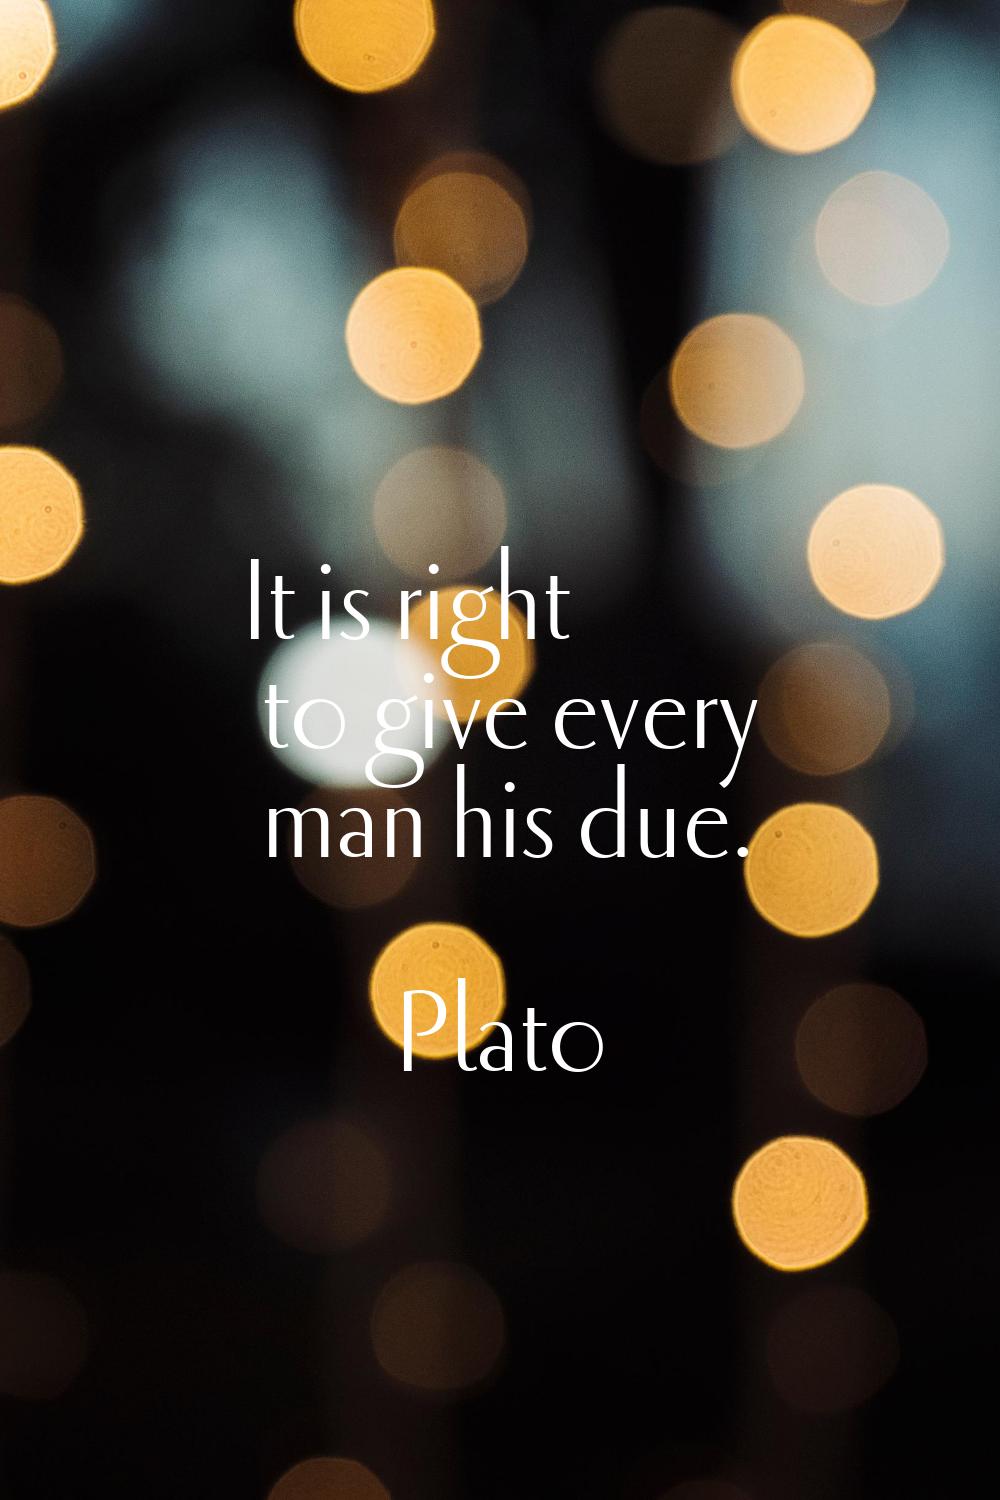 It is right to give every man his due.